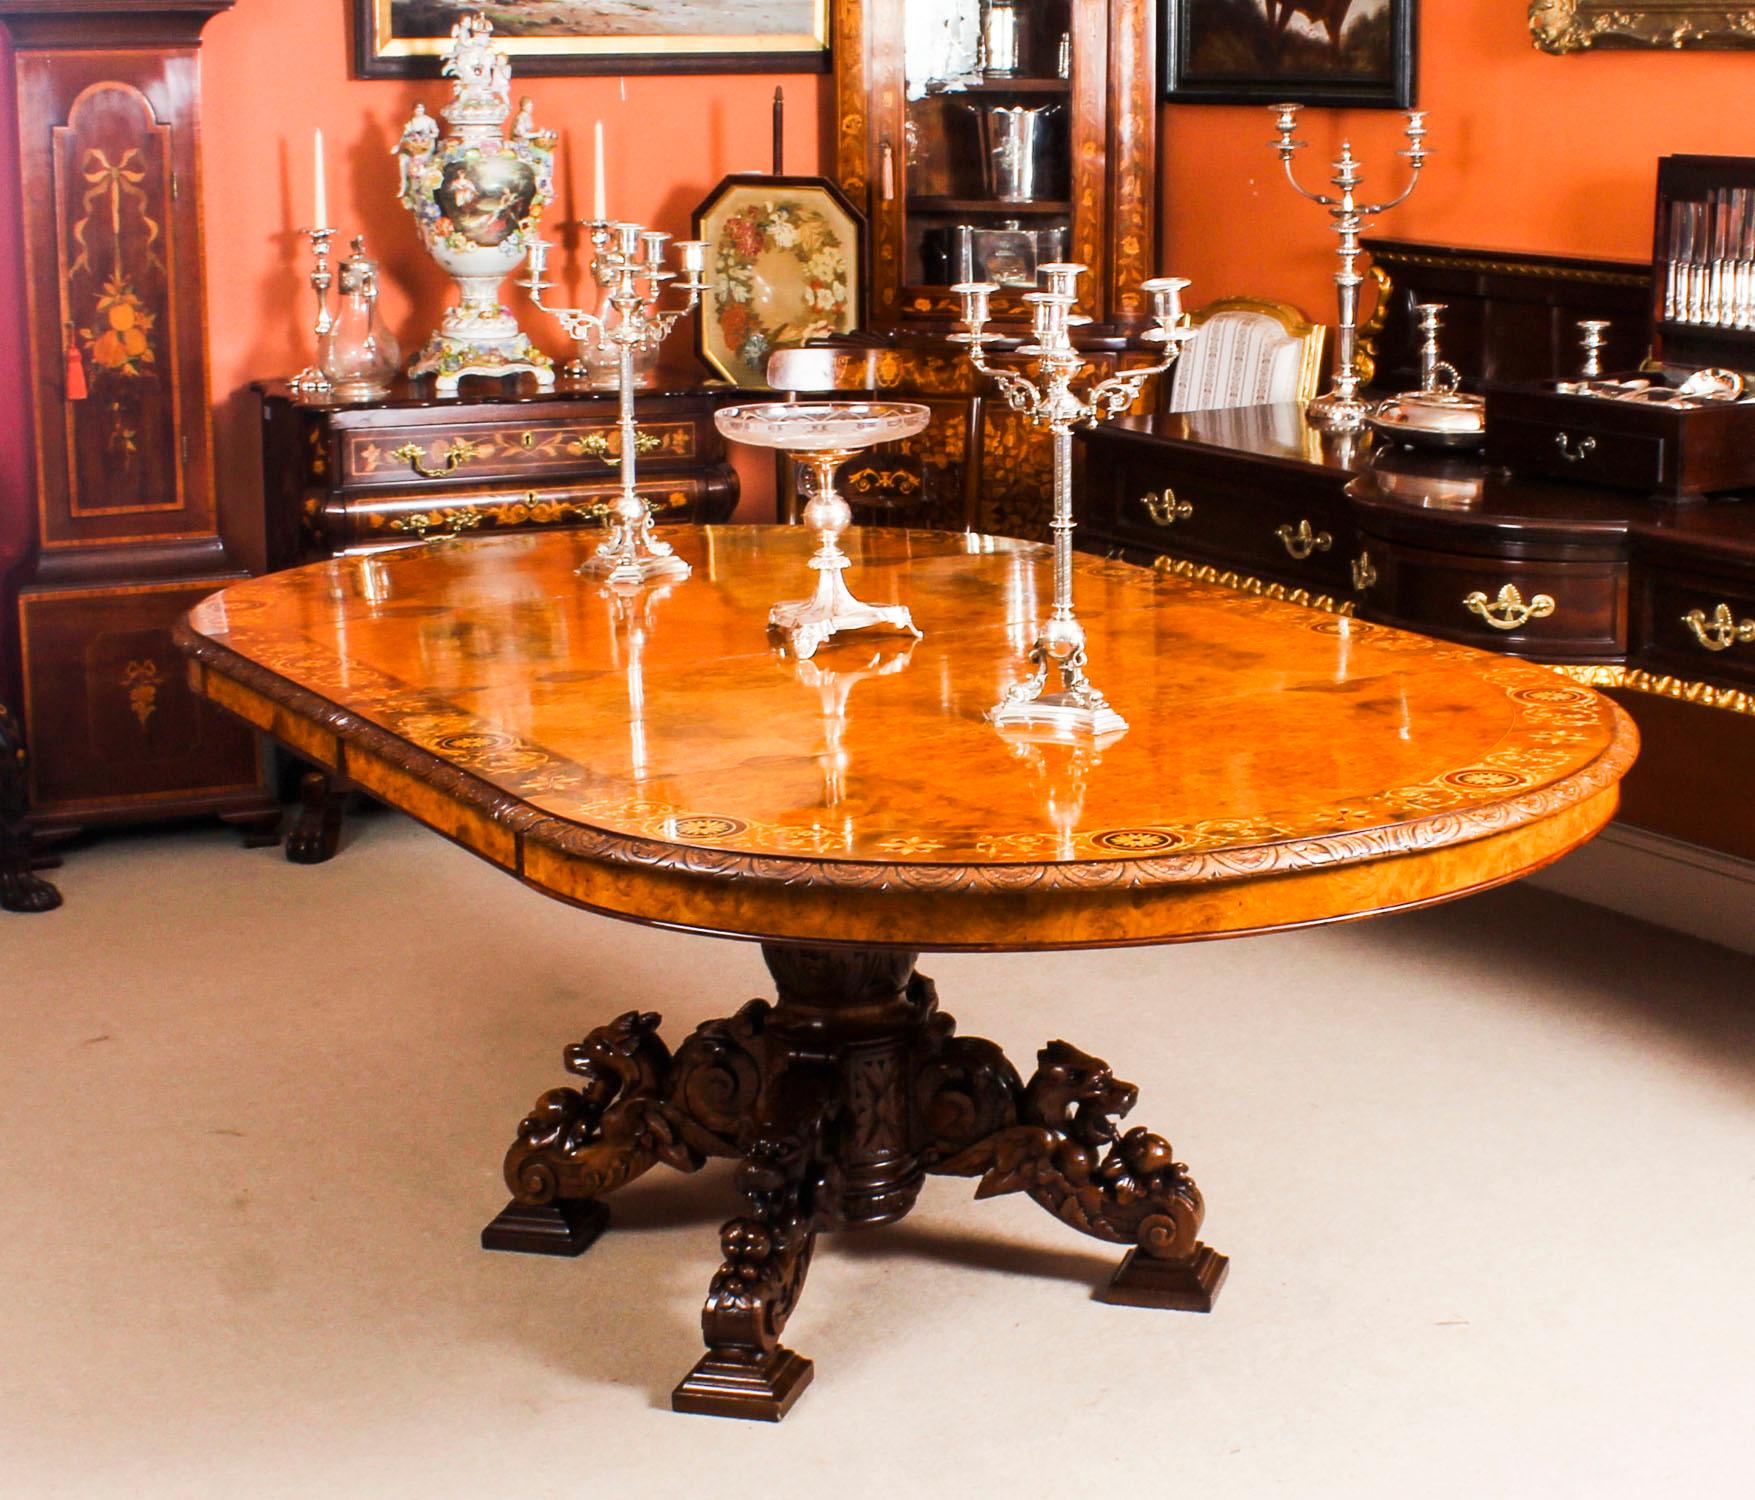 There is no mistaking the style and design of this exquisite Victorian pollard oak and marquetry extending dining table, circa 1880 in date. 

This stunning table has two leaves which can be added or removed as required to suit the occasion and